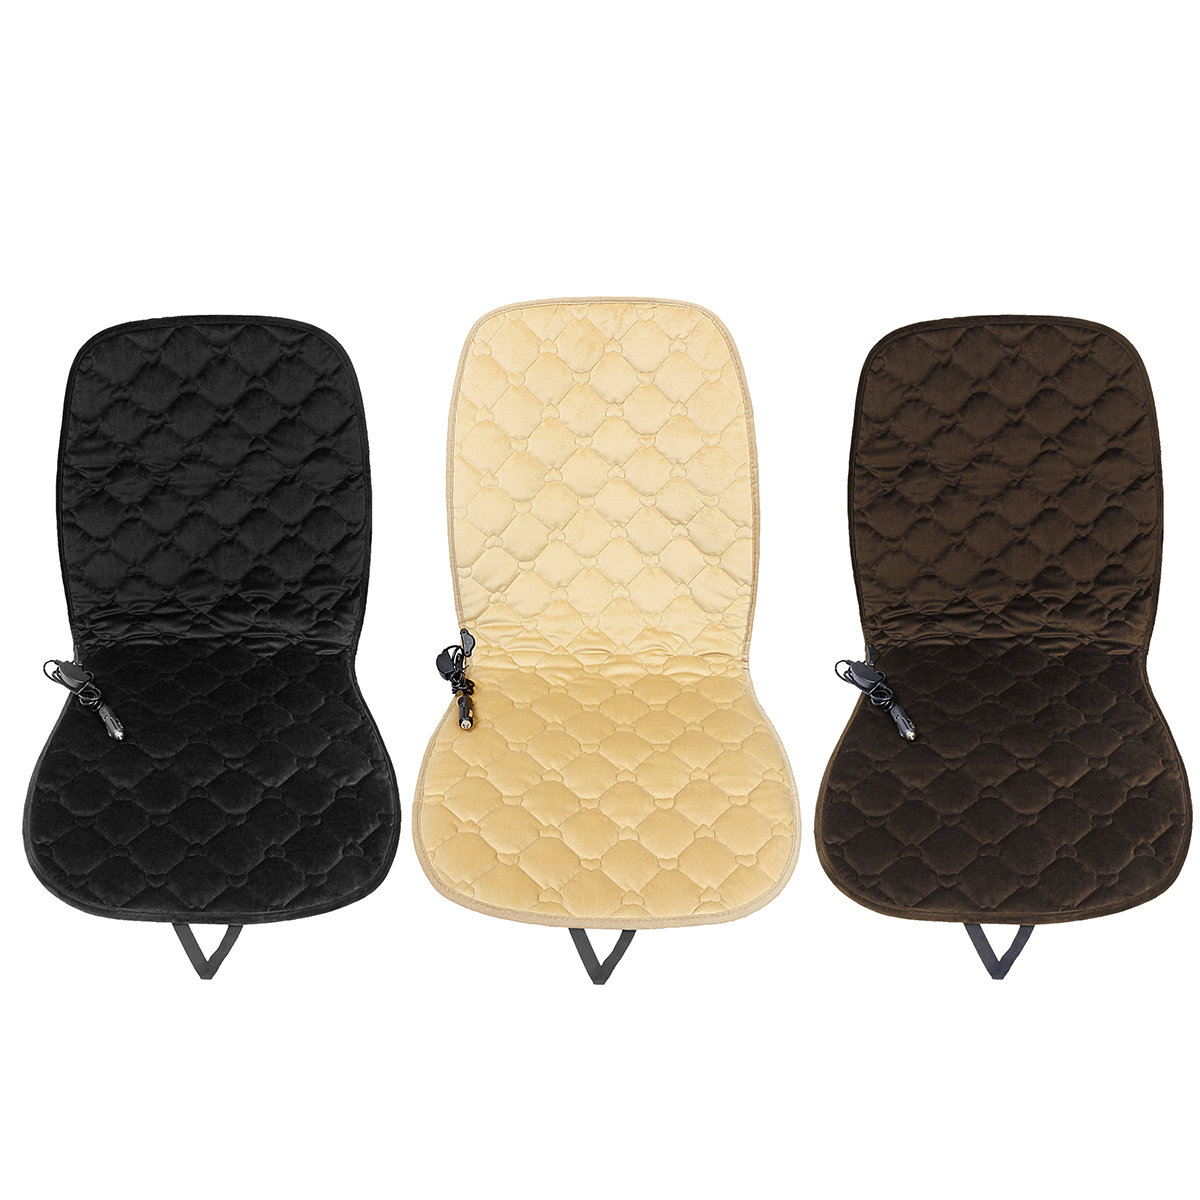 12V-Car-Plush-Heated-Seat-Cushion-Seat-Warmer-Winter-Household-Cover-Electric-Heating-Mat-1367888